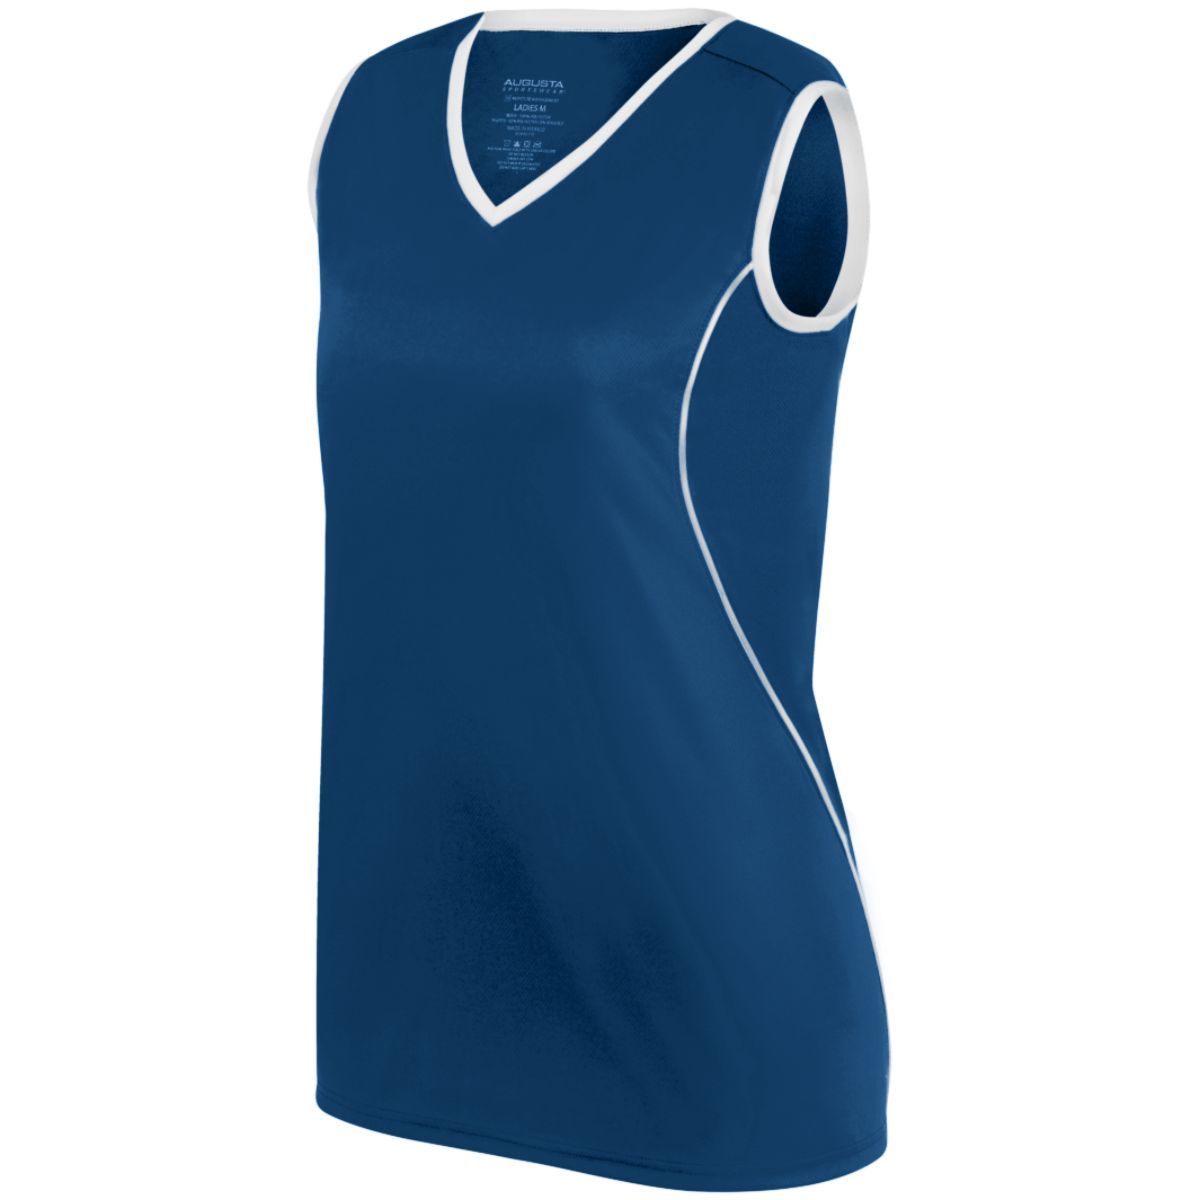 Augusta Sportswear Girls Firebolt Jersey in Navy/White  -Part of the Girls, Augusta-Products, Softball, Girls-Jersey, Shirts product lines at KanaleyCreations.com